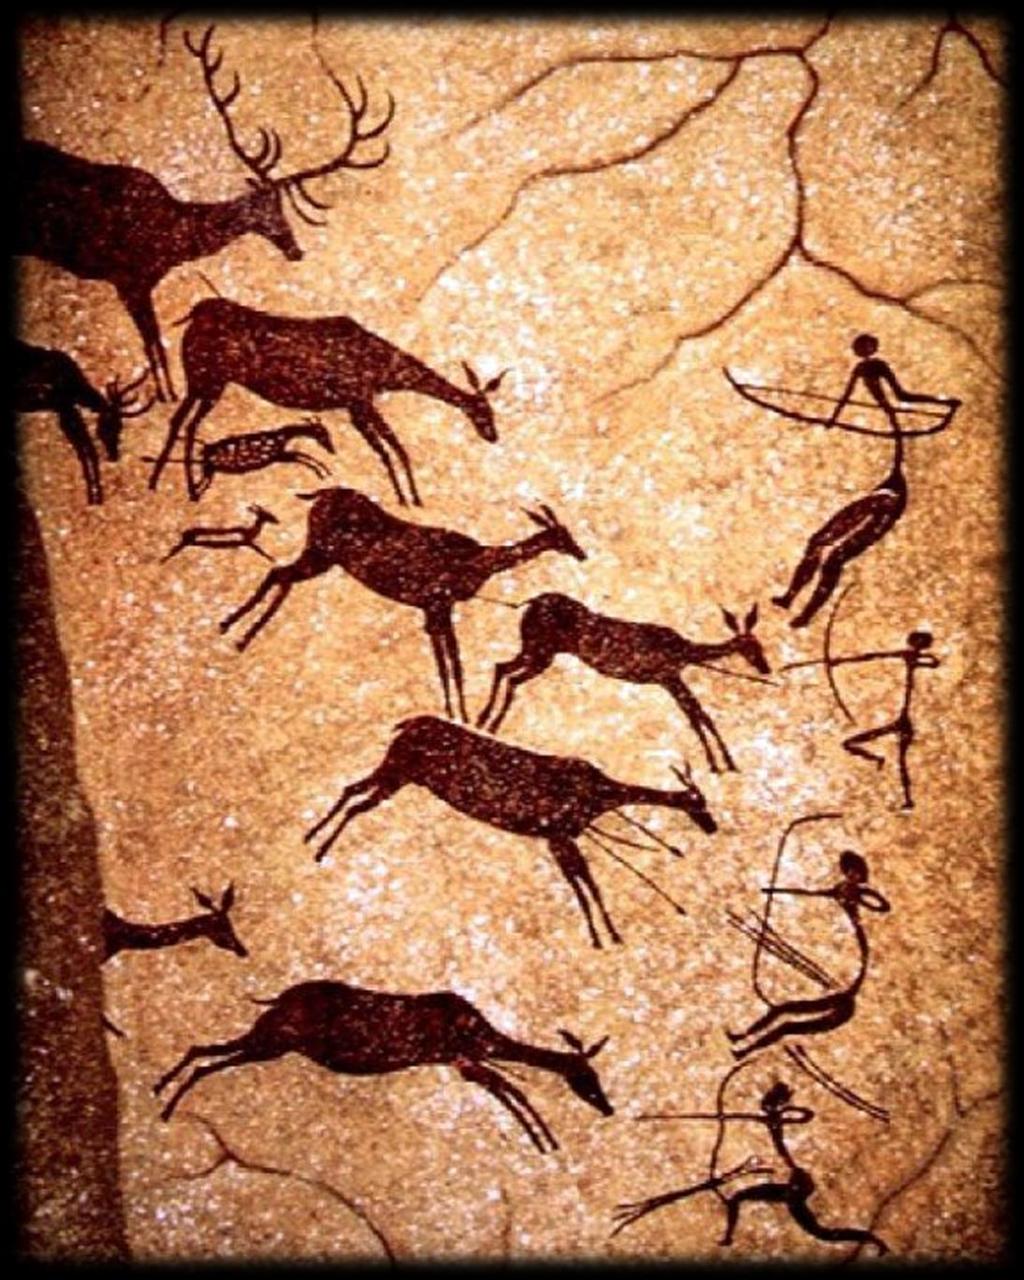 Paleolithic Shift People were hunter-gatherers until they discovered farming.